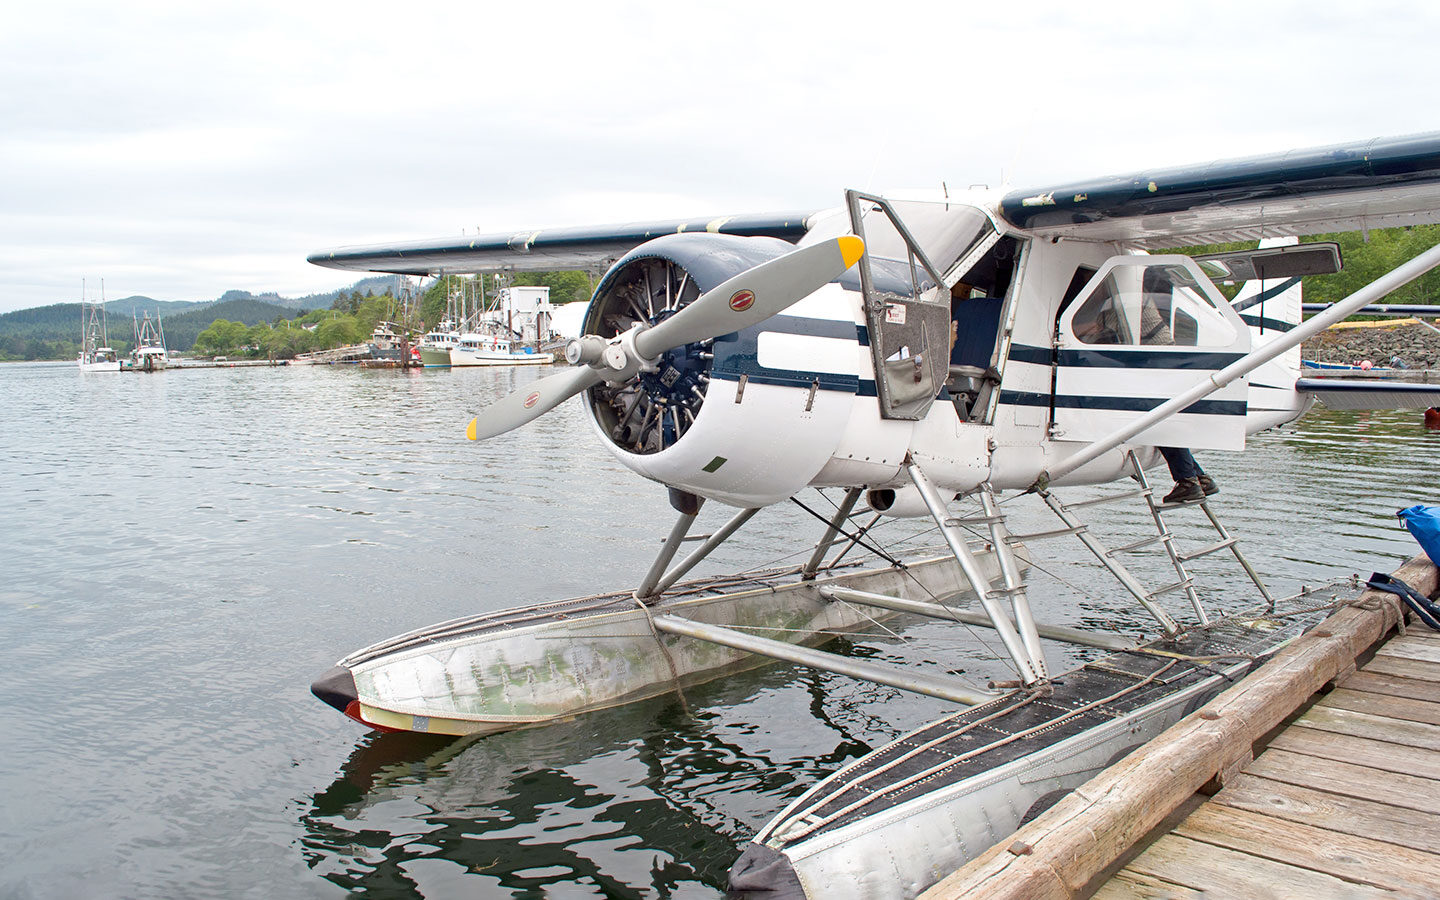 Float plane for the journey into the Great Bear Rainforest